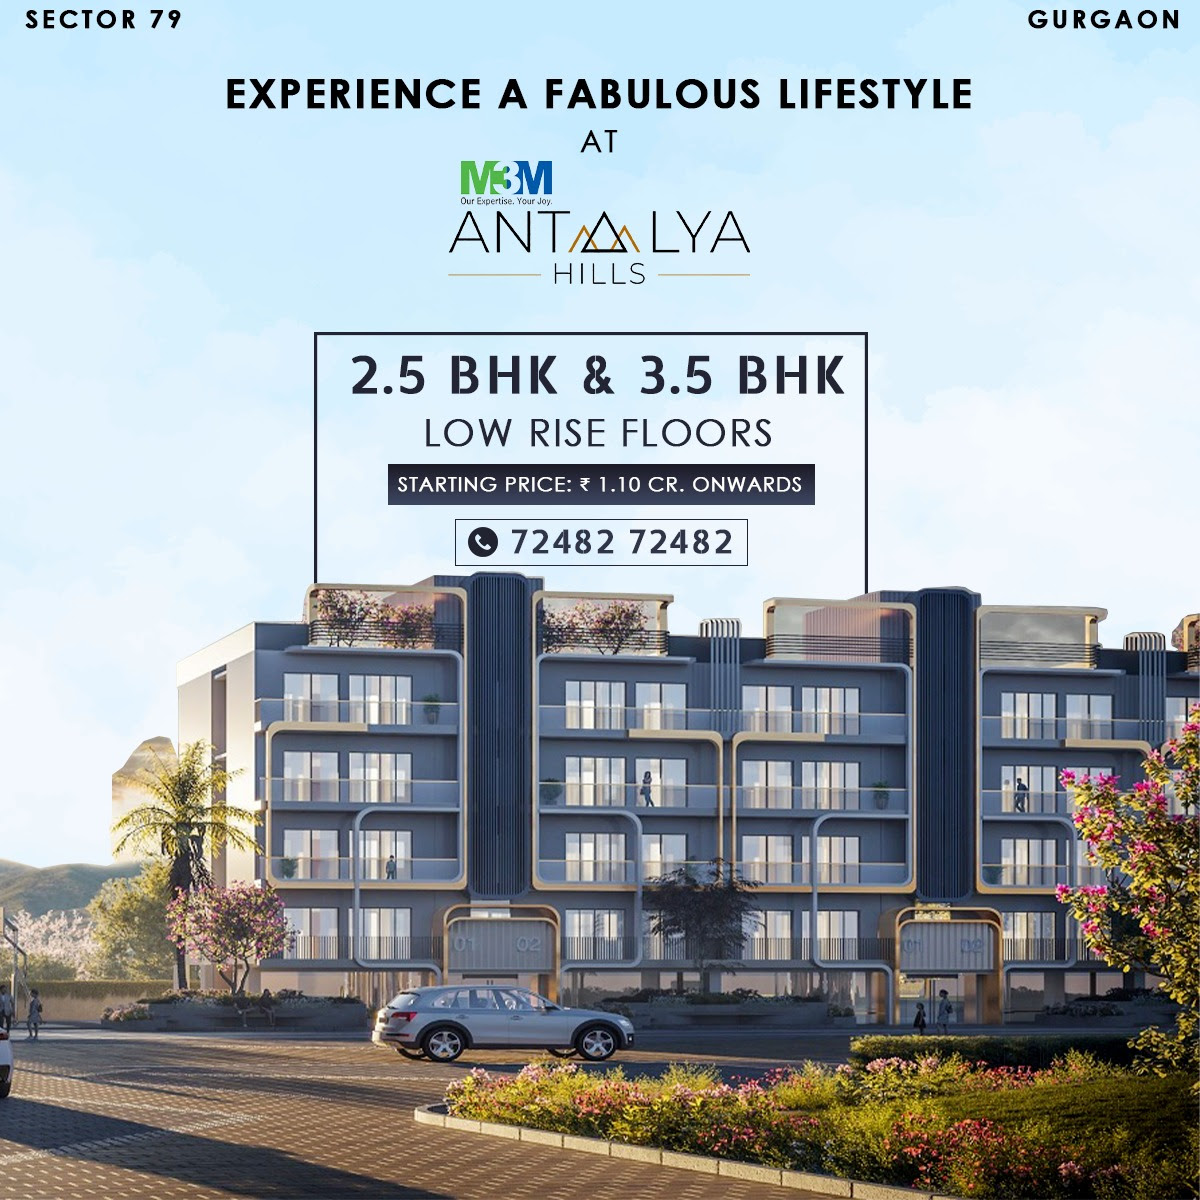 Launched 2.5 & 3.5 BHK air conditioned luxury floors at M3M Antalya Hills in Sec 79, Gurgaon Update